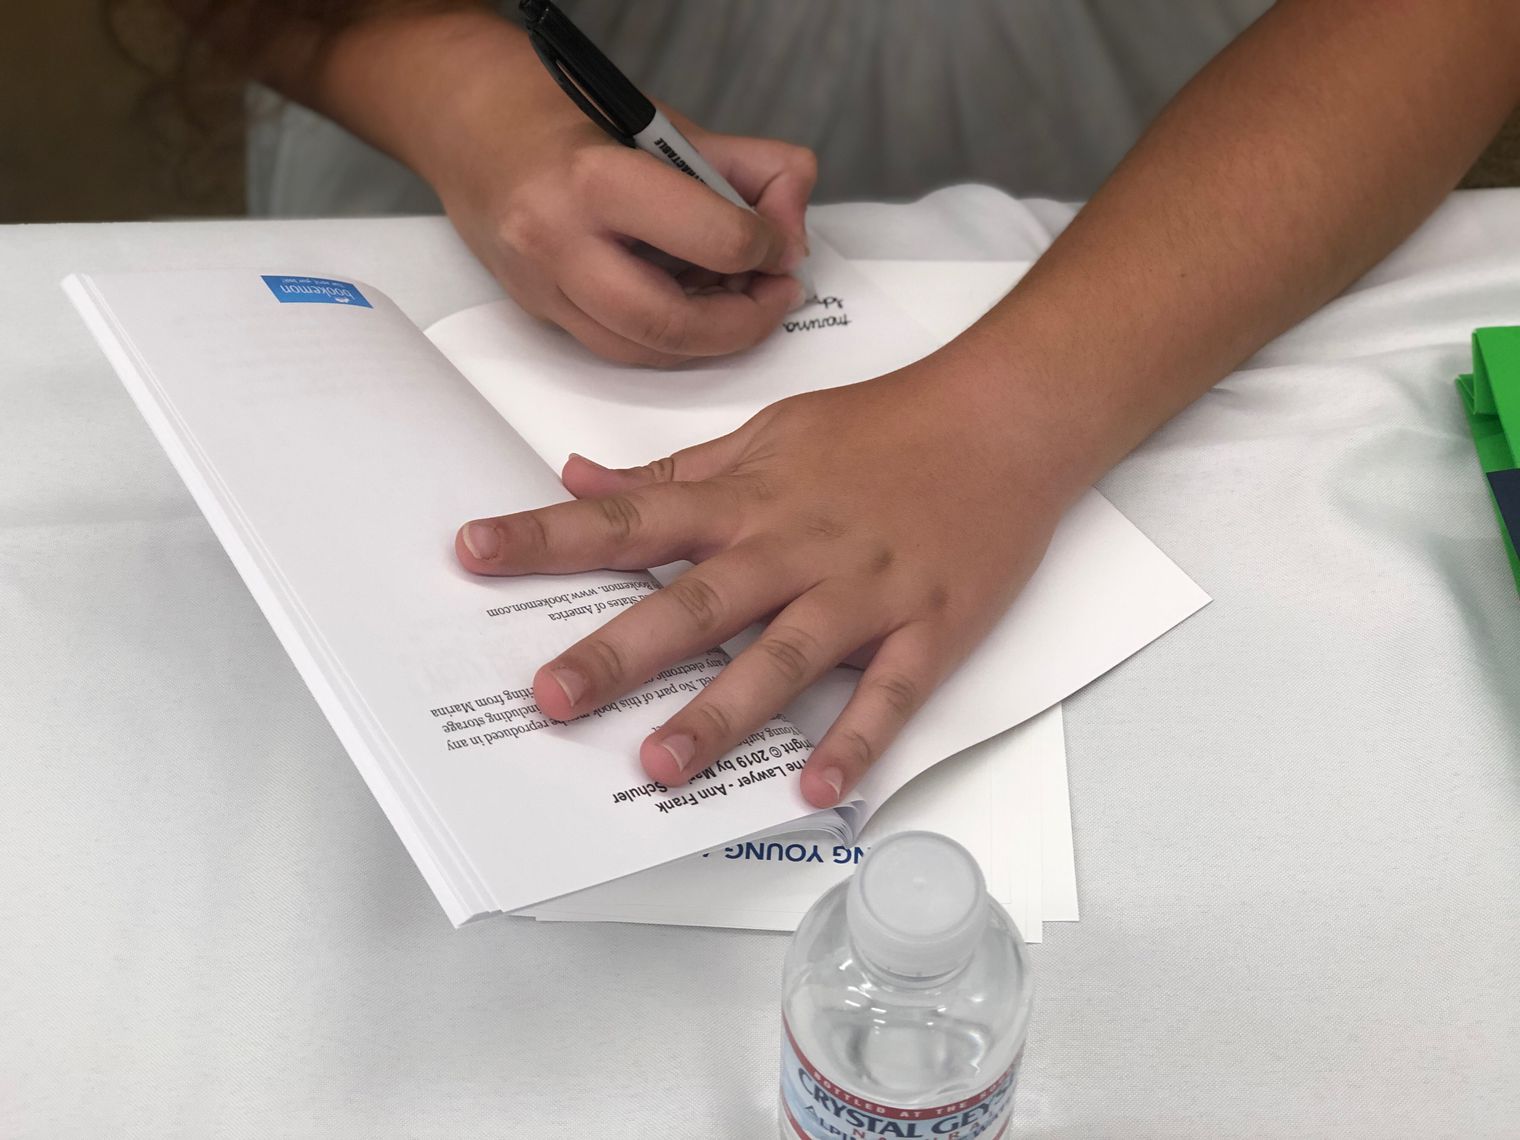 hands signing a book.